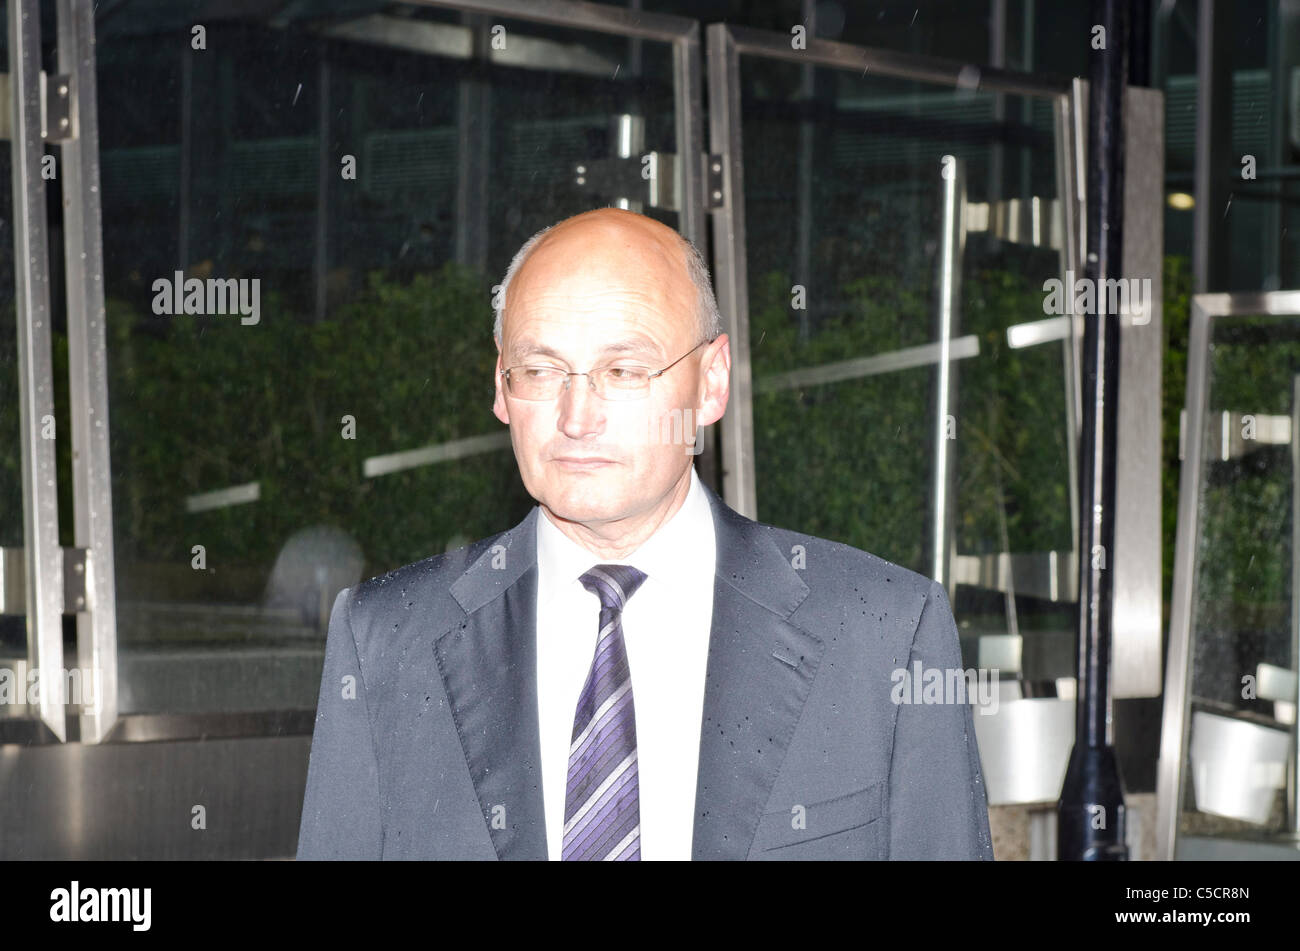 Sir Paul Stephenson Commissioner of the Metropolitan Police outside New Scotland Yard resigning Stock Photo